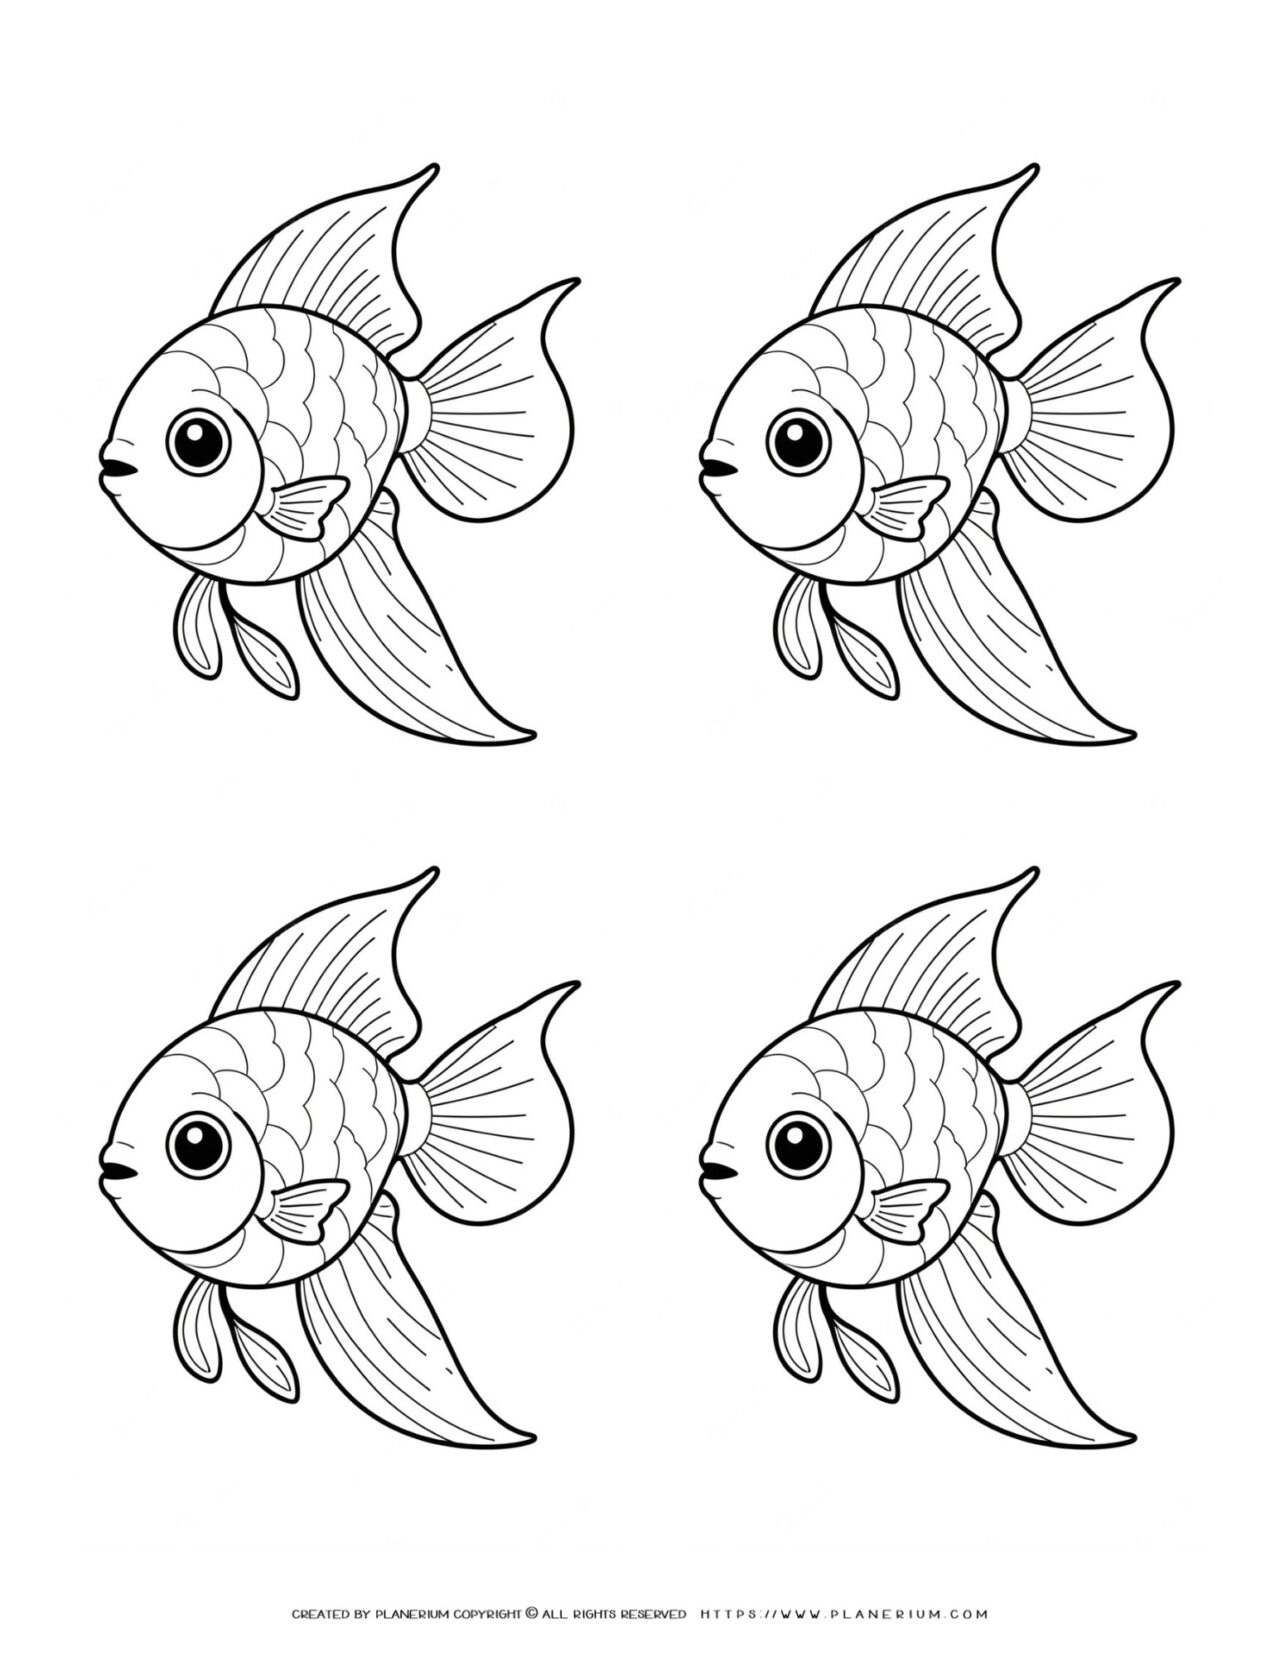 Four-cartoon-goldfish-illustrations-for-coloring